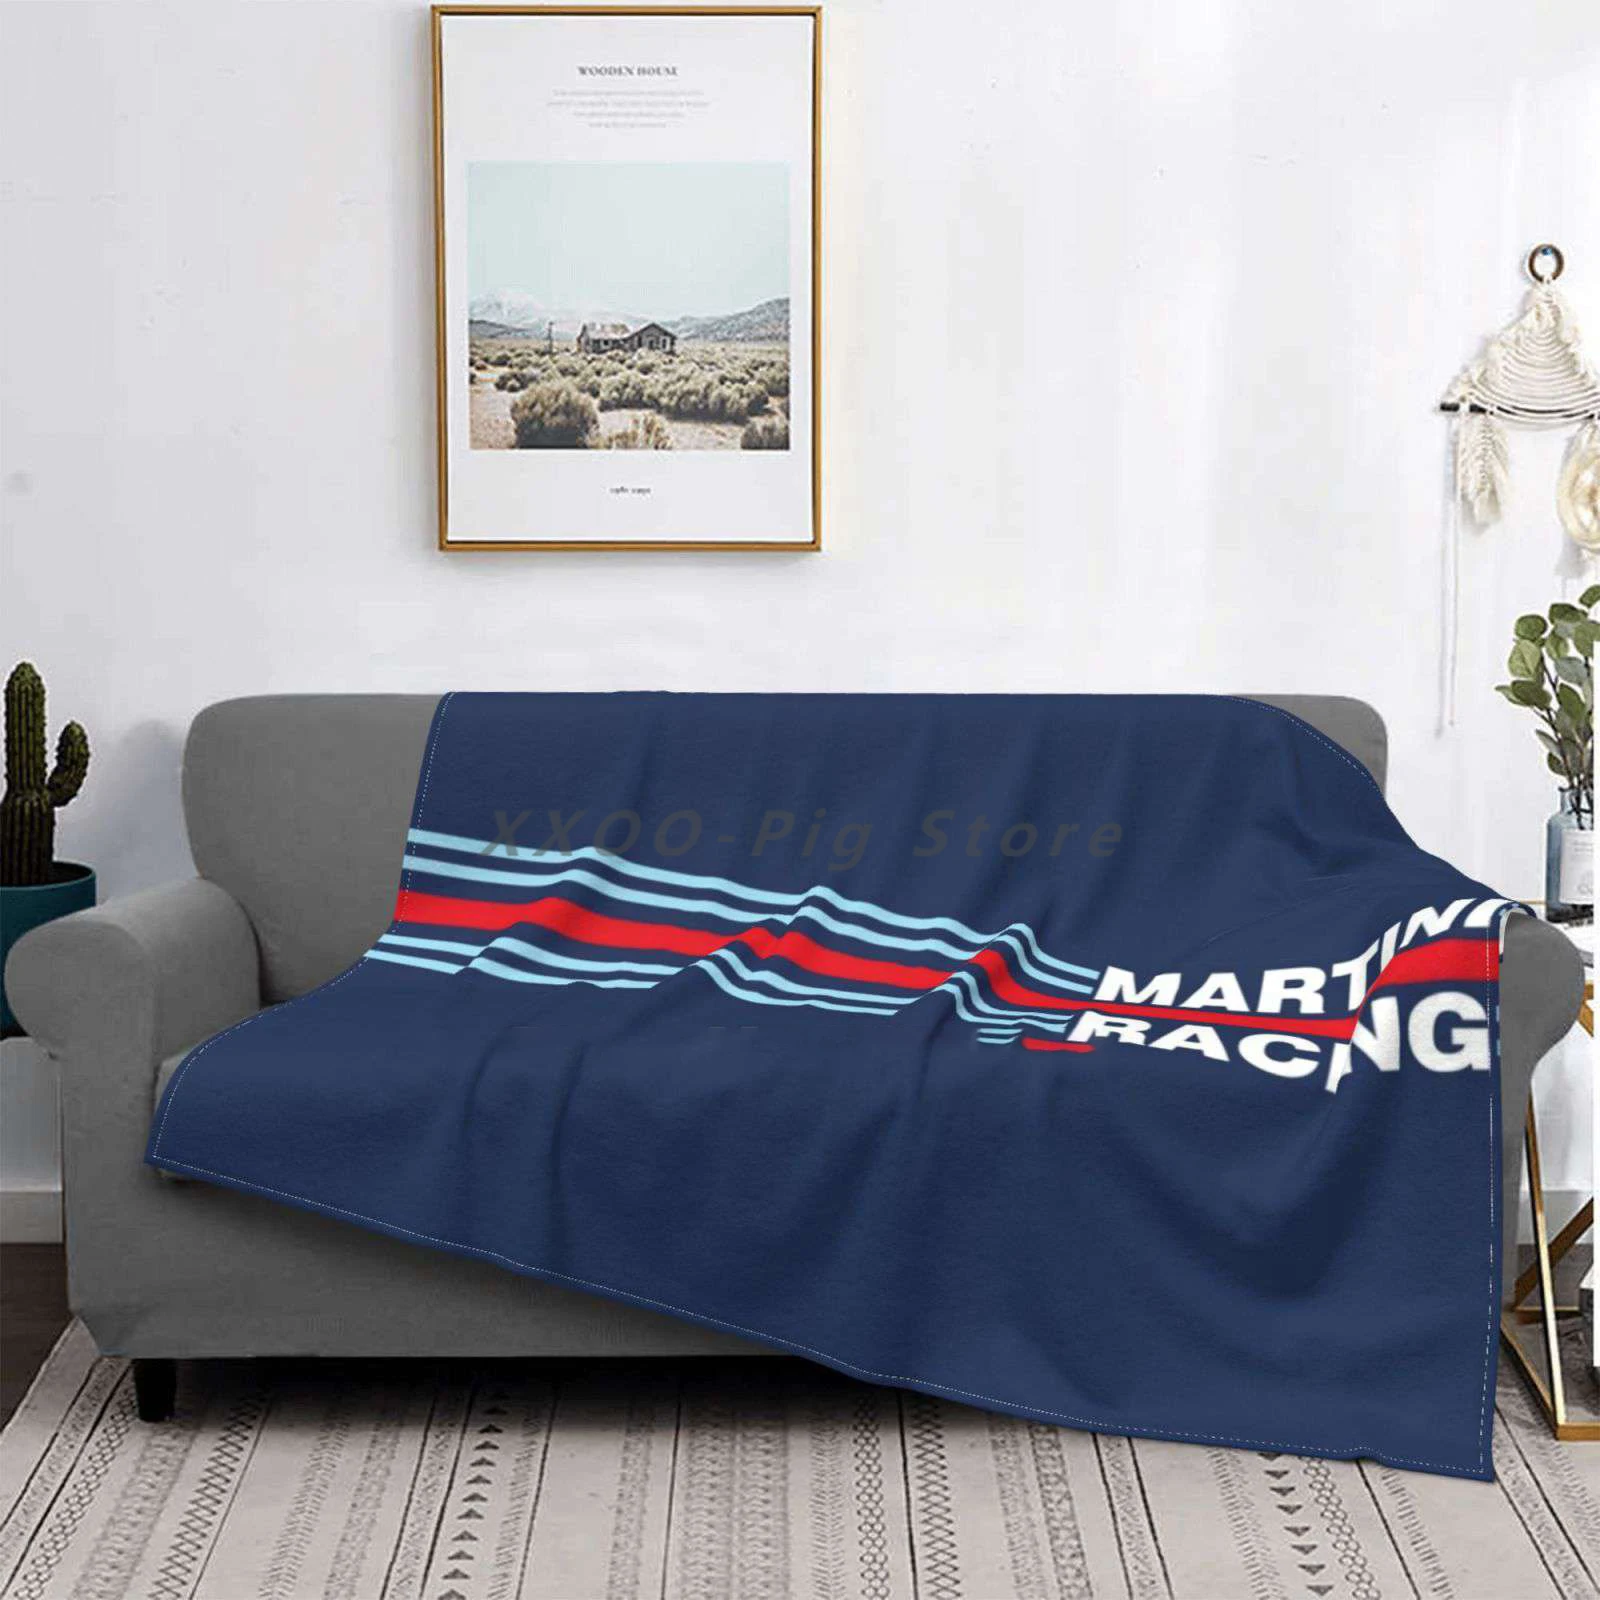 

I Racing Horizontal Stripe Hot Sale Printing High Qiality Flannel Blanket Lancia Delta Hf Integrate S4 Thema Stratos 037 Fiat